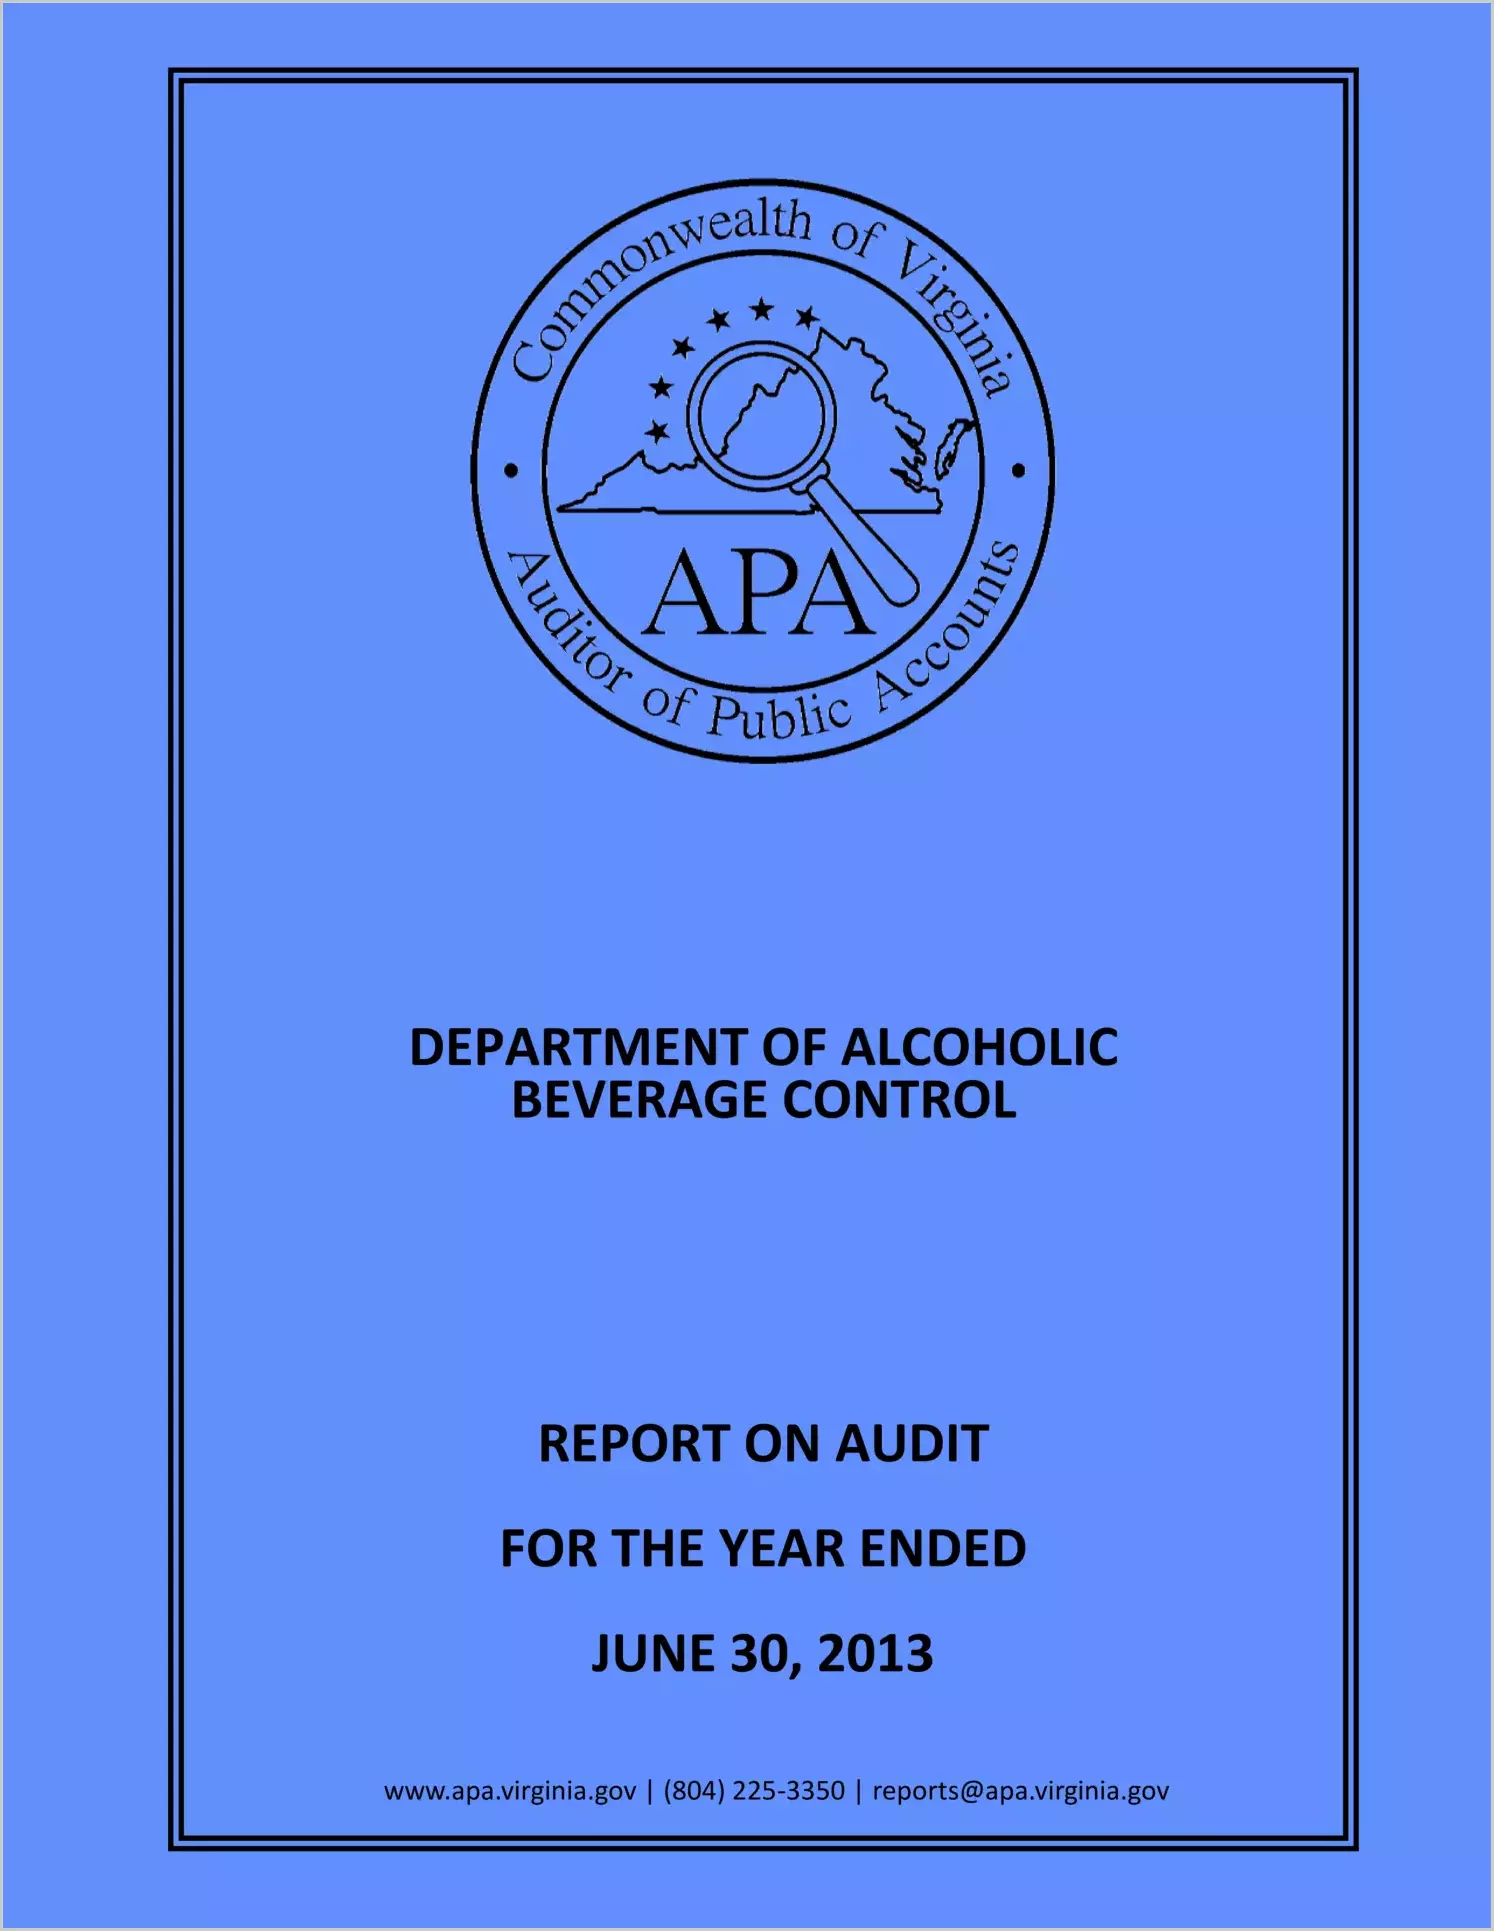 Department of Alcoholic Beverage Control as of and for the year ended June 30, 2013